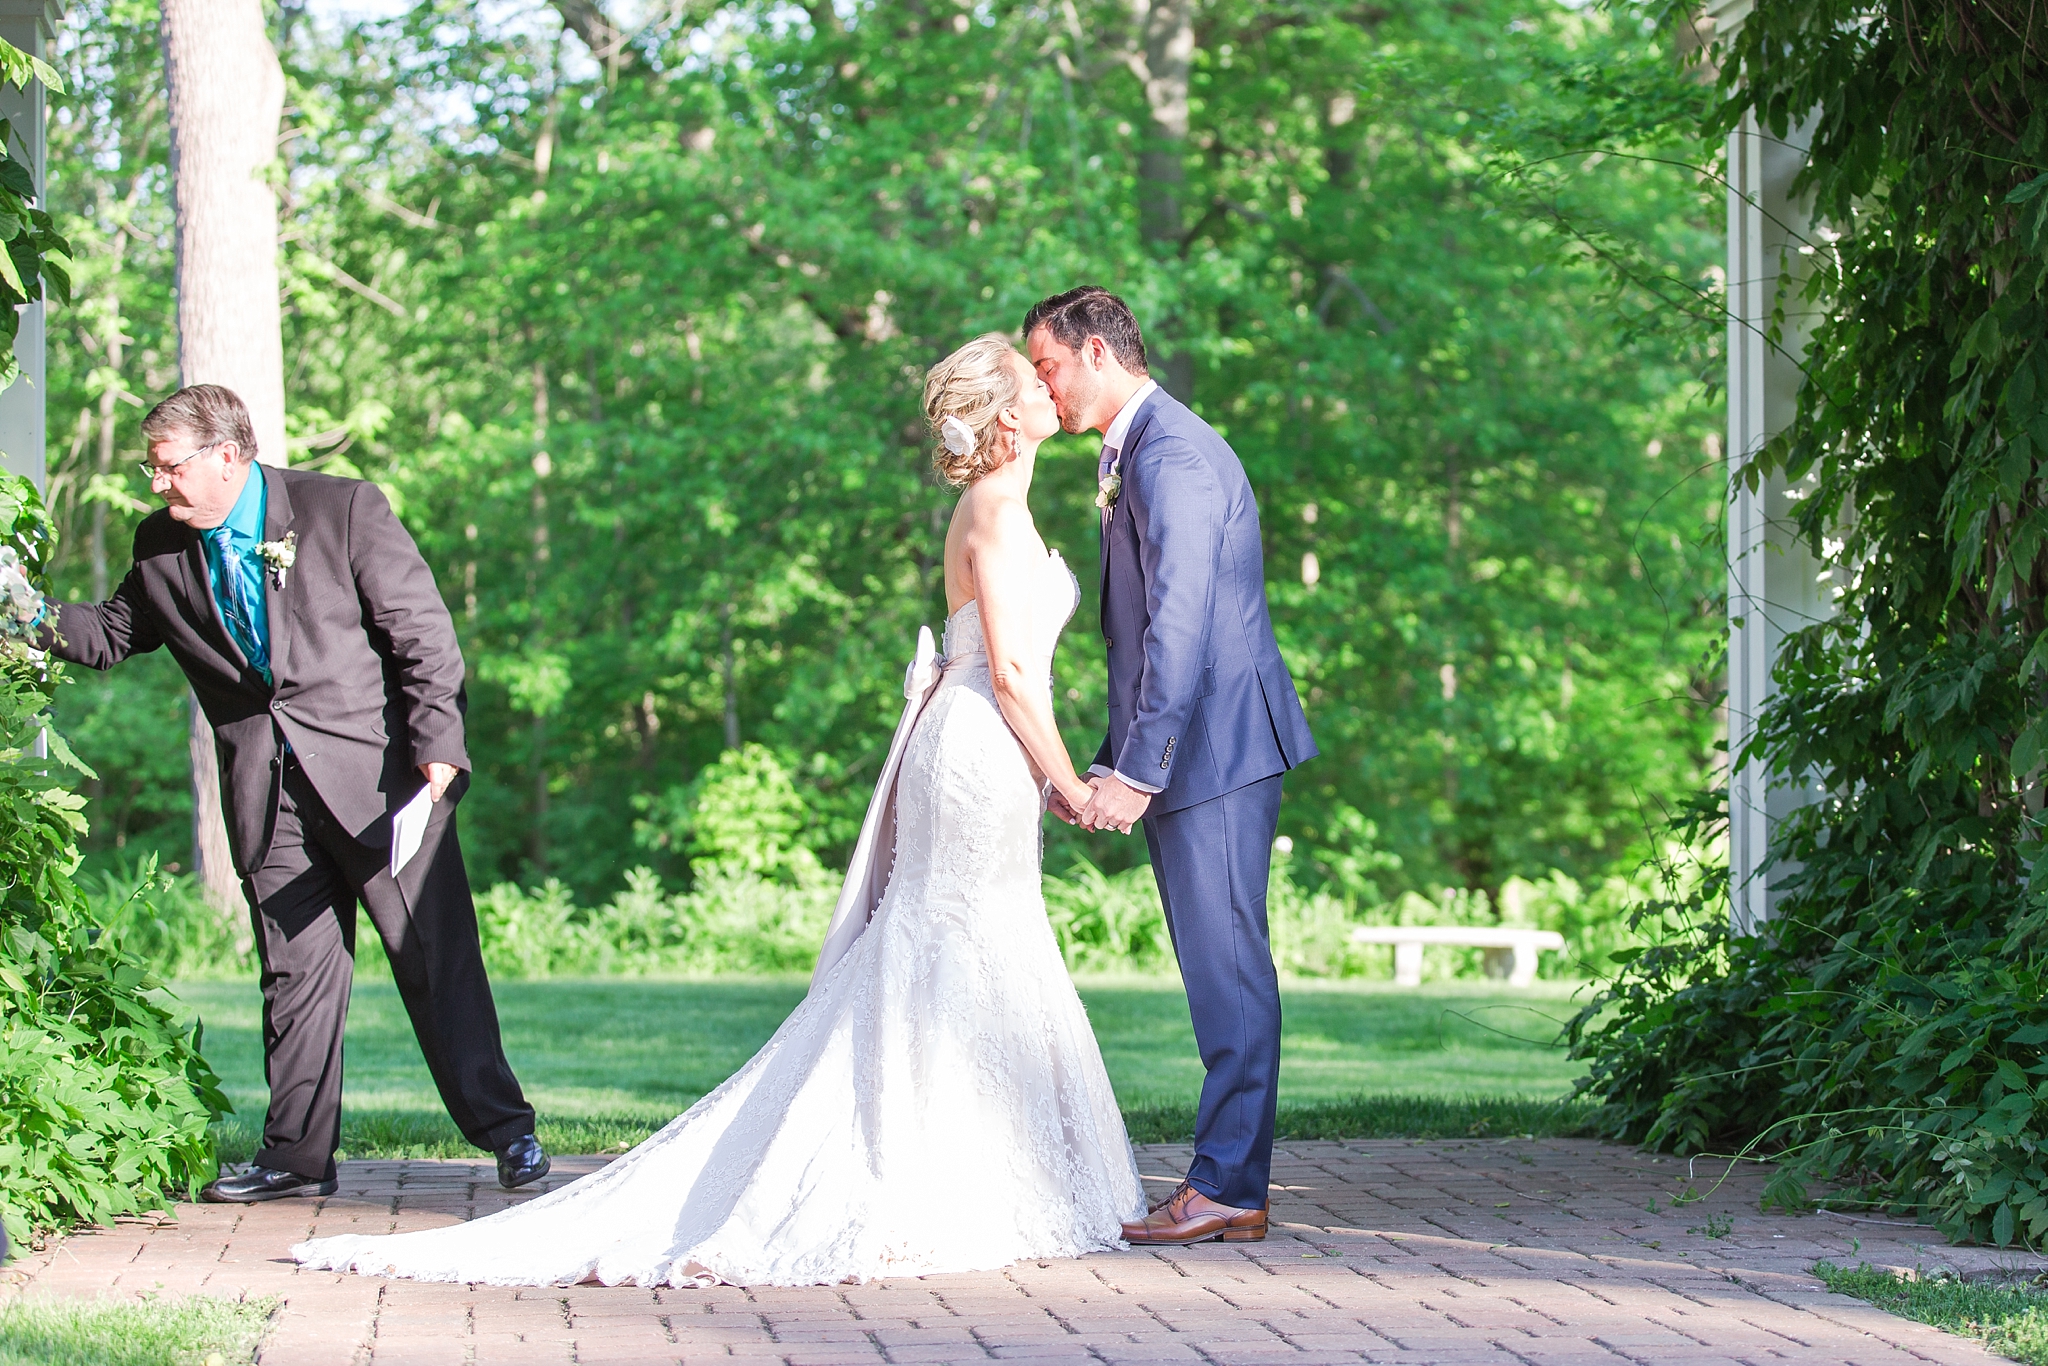 fun-candid-laid-back-wedding-photos-at-wellers-carriage-house-in-saline-michigan-and-at-the-eagle-crest-golf-resort-by-courtney-carolyn-photography_0071.jpg